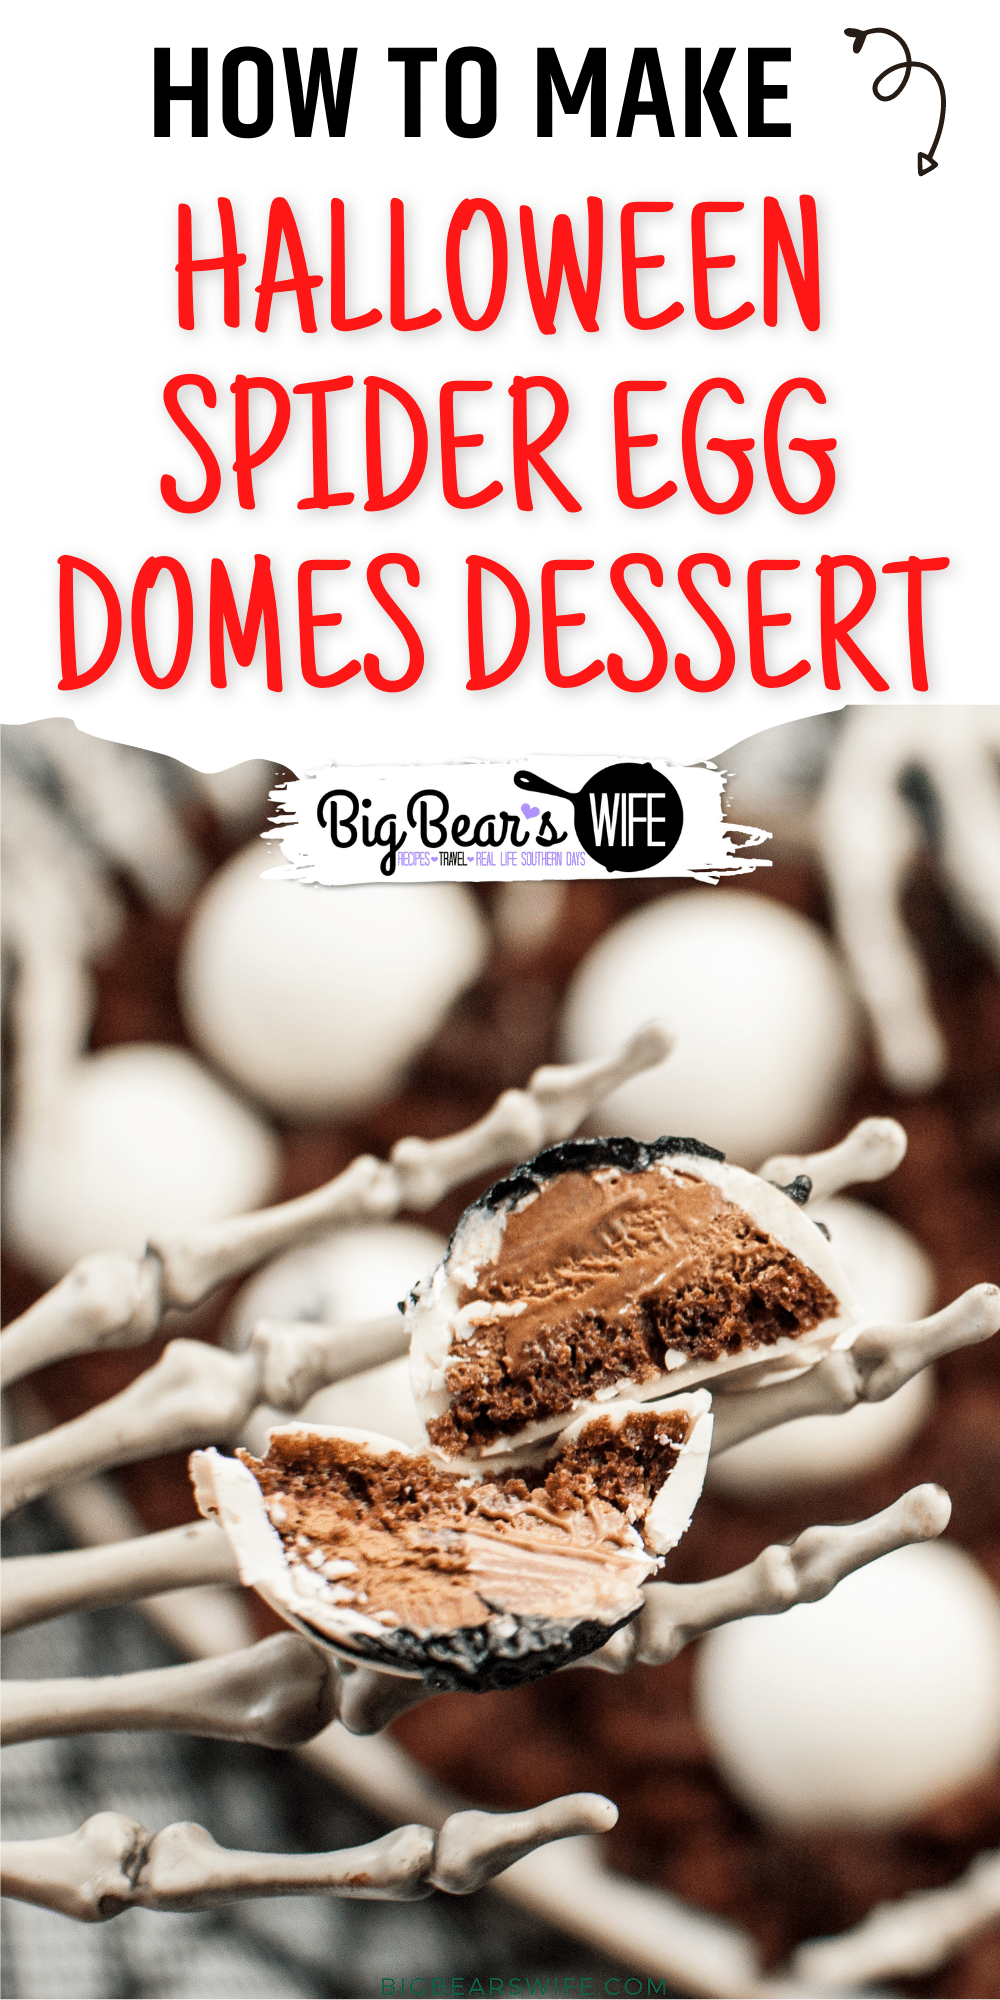 Halloween Spider Egg Domes Dessert - A creepy Halloween dessert, with layers of chocolate cake and dark chocolate mousse! These little bites are covered in white melting chocolate and decorated with black spiders to look like spider eggs. Perfect for Halloween! via @bigbearswife